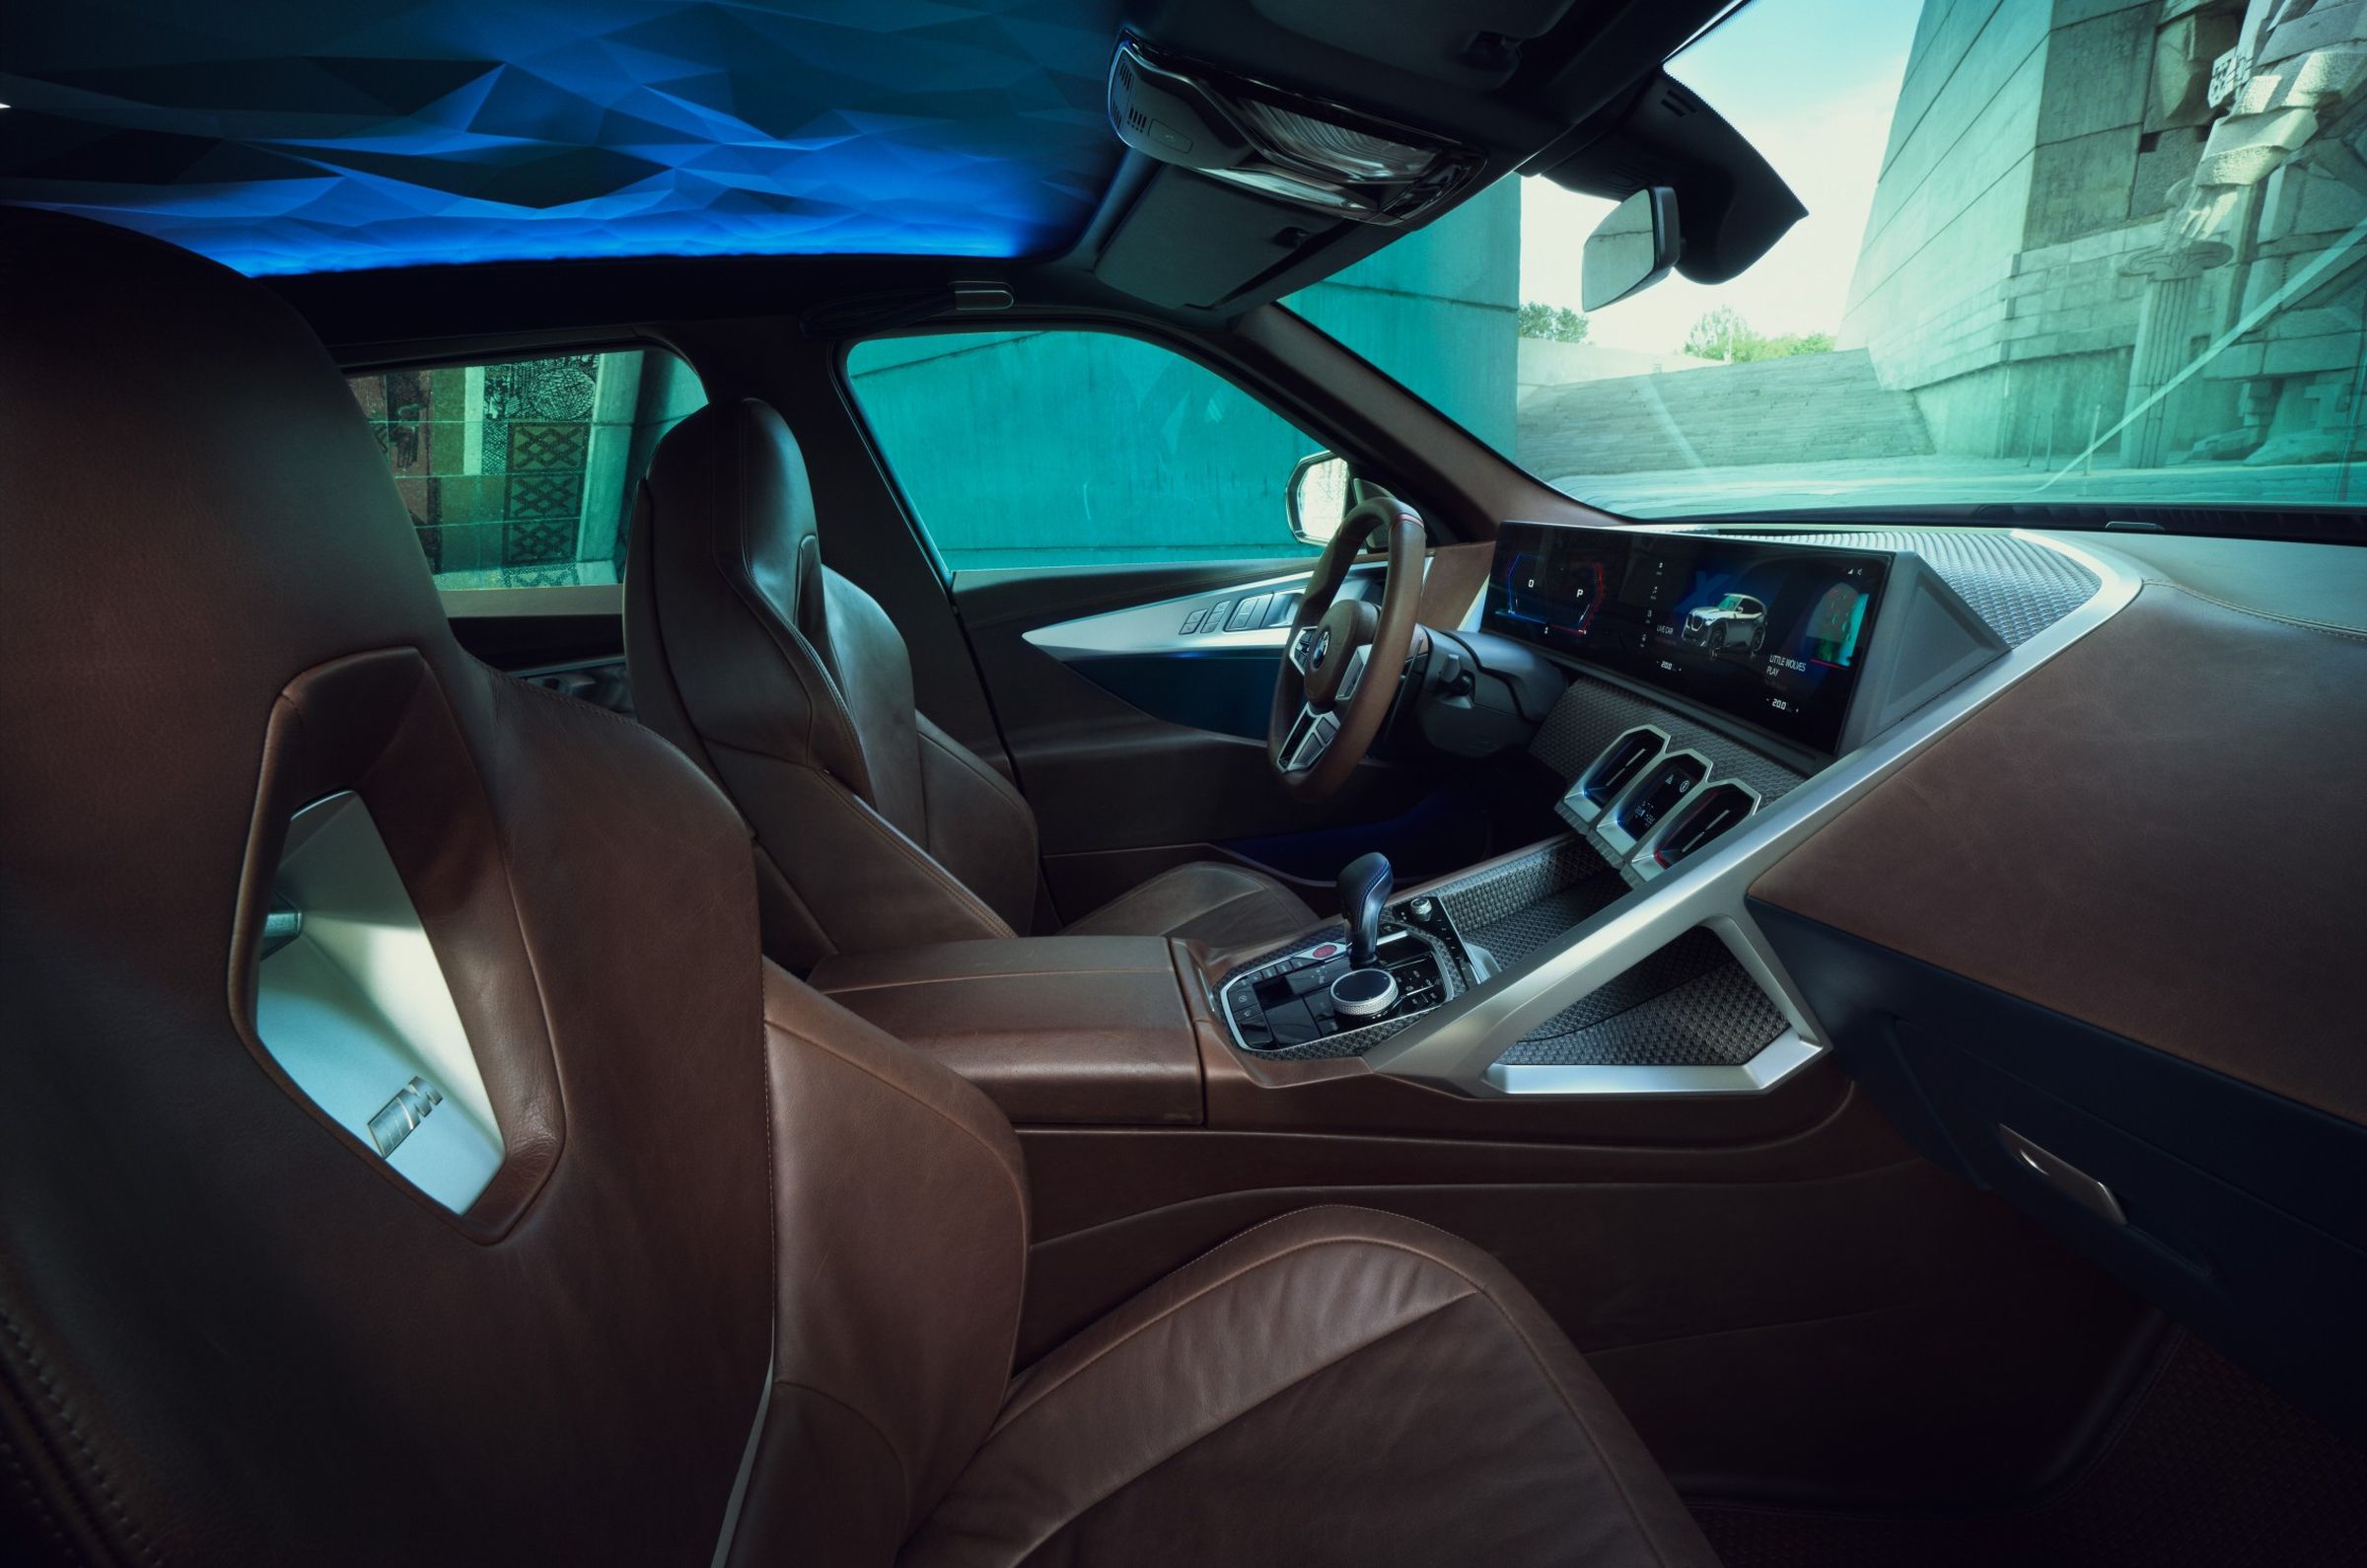 The interior of the BMW XM concept vehicle.